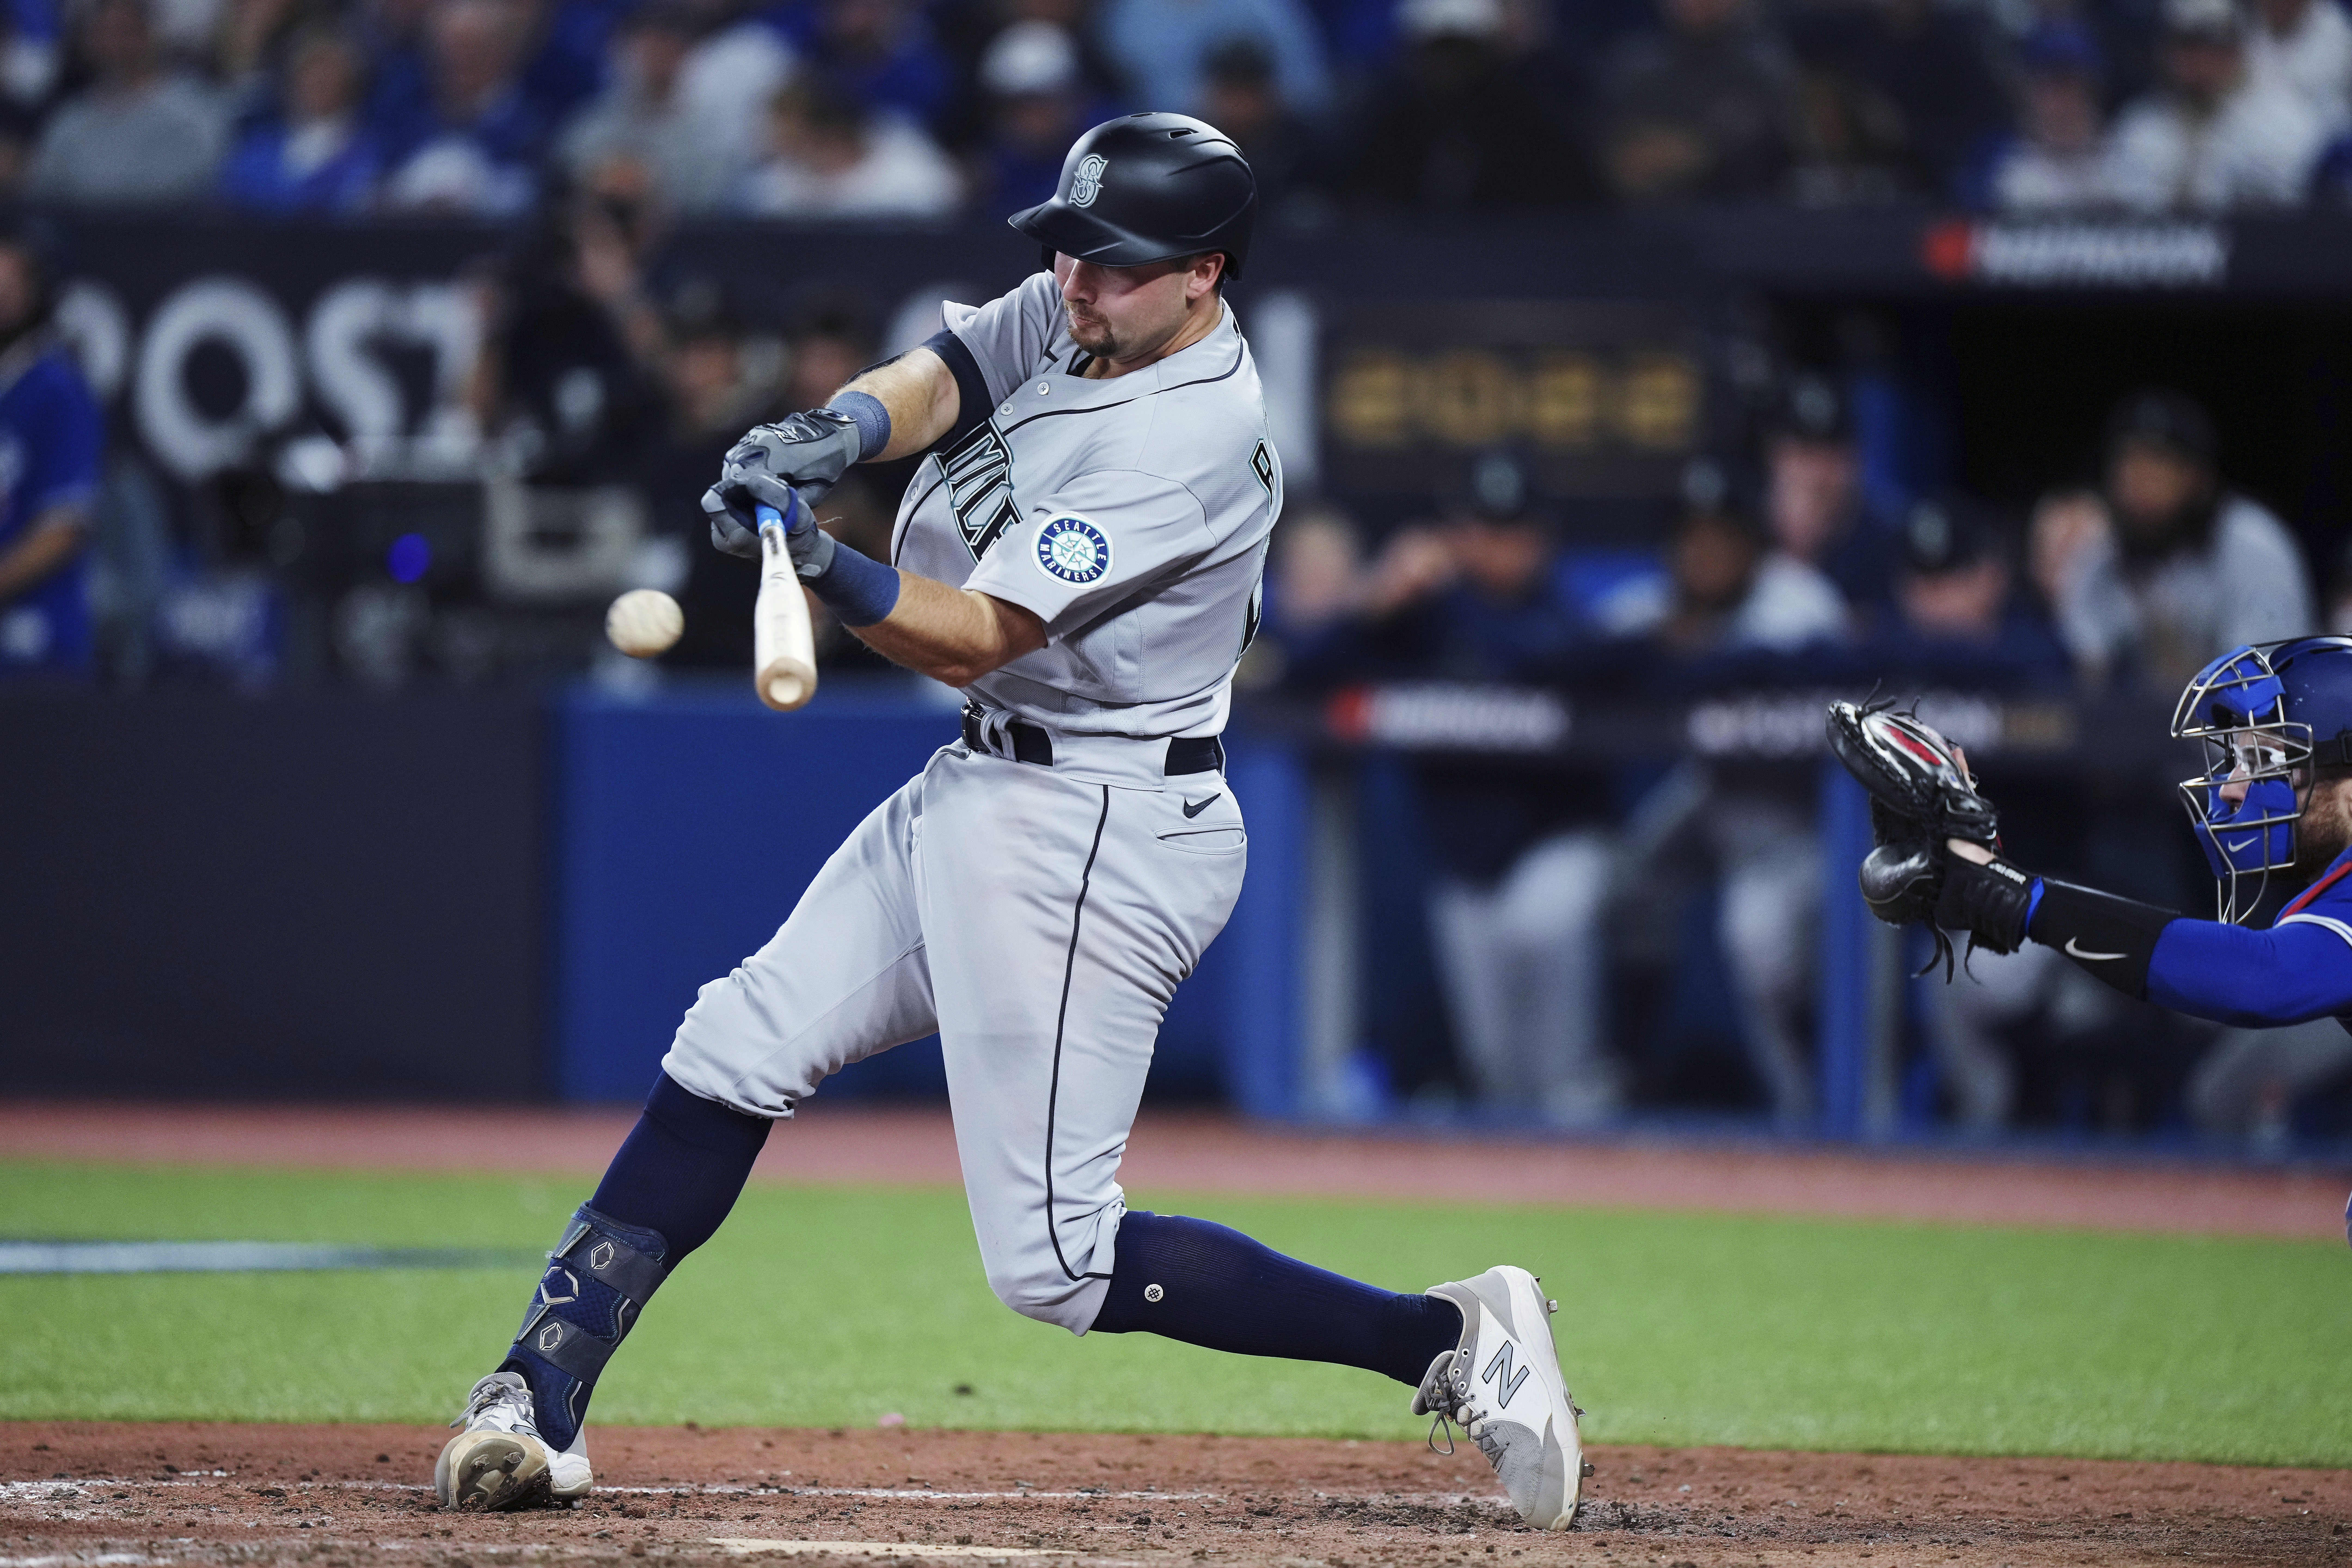 Tides changing? Mariners take series win over Rays with one-run victory in  rubber match — Converge Media